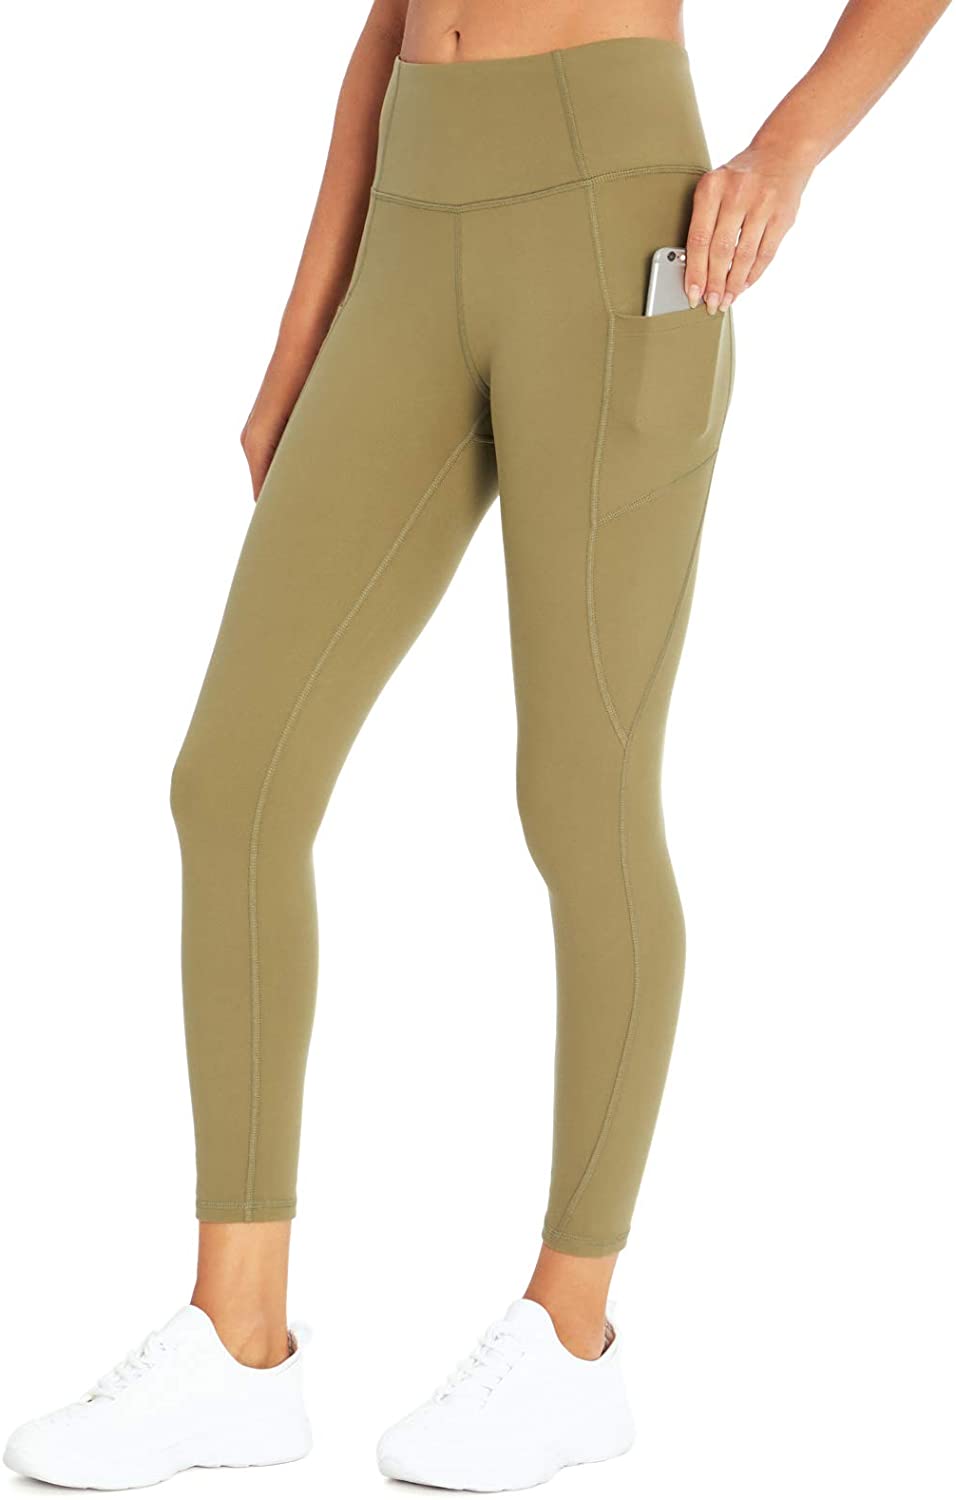 Jessica Simpson Pockets Athletic Pants for Women